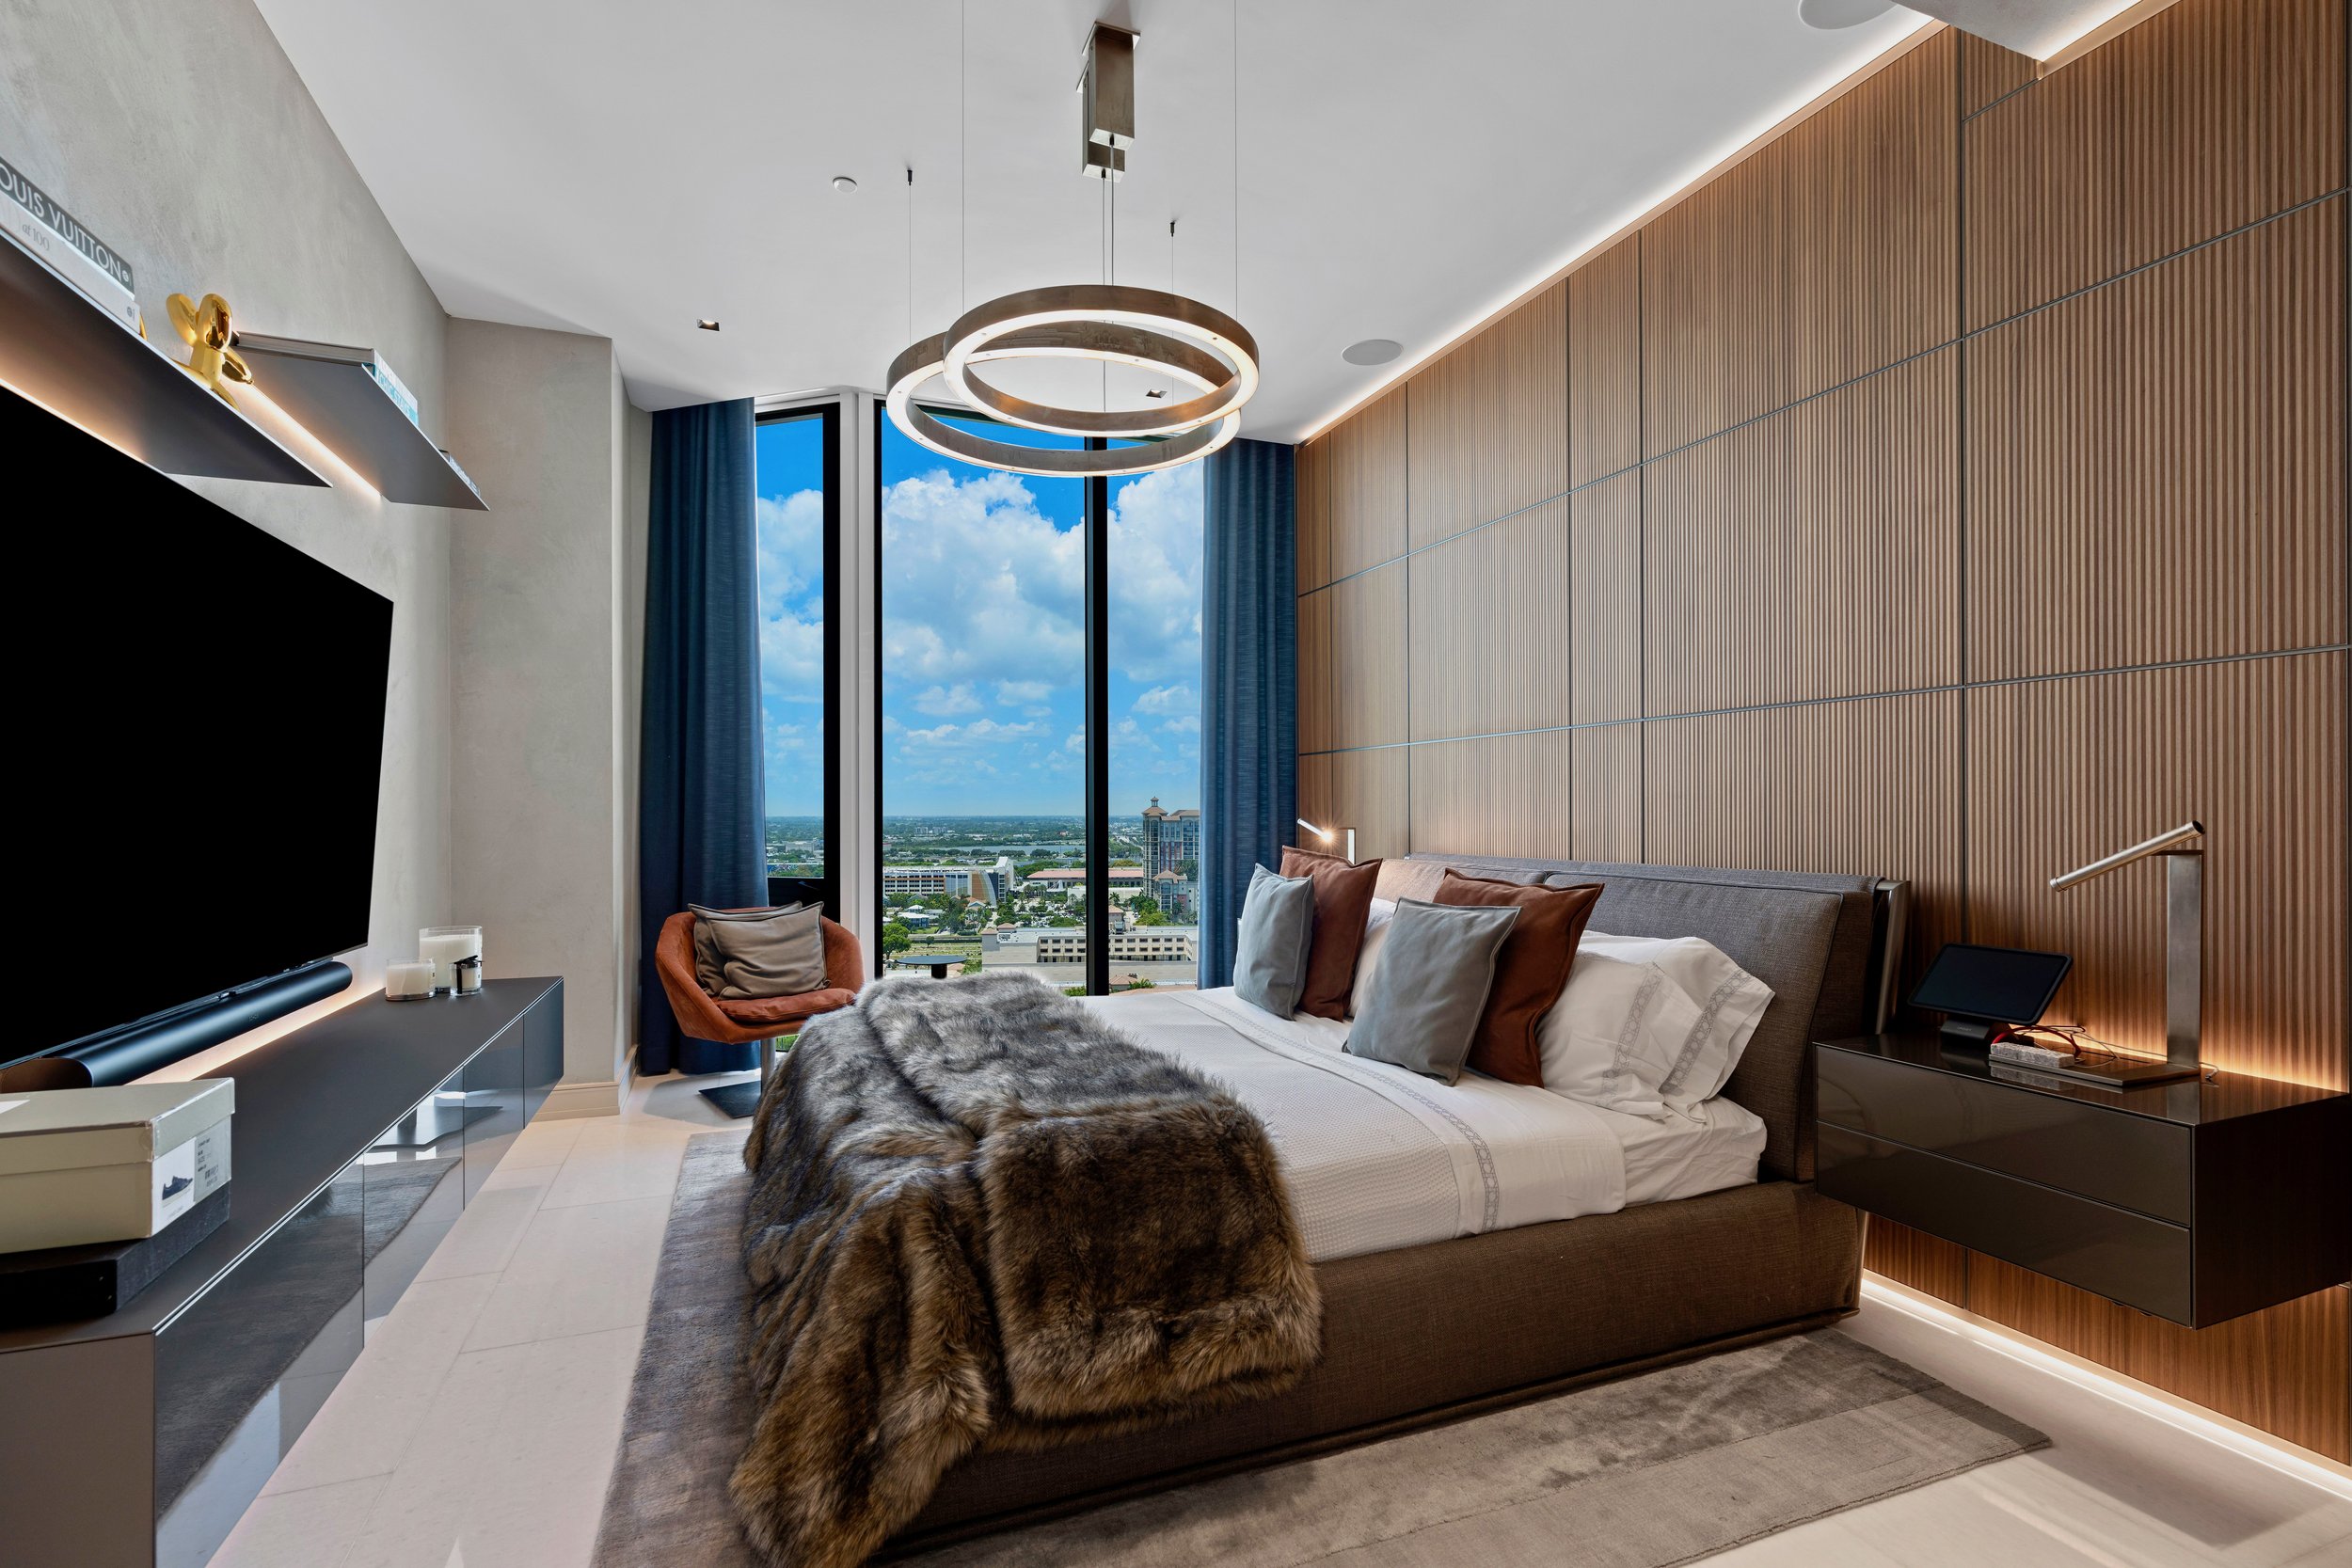 Step Inside An Ultra-Luxe Condo At The Bristol In West Palm Beach Asking $23.9 Million, Over $4,600 Per Square Foot 18.jpg